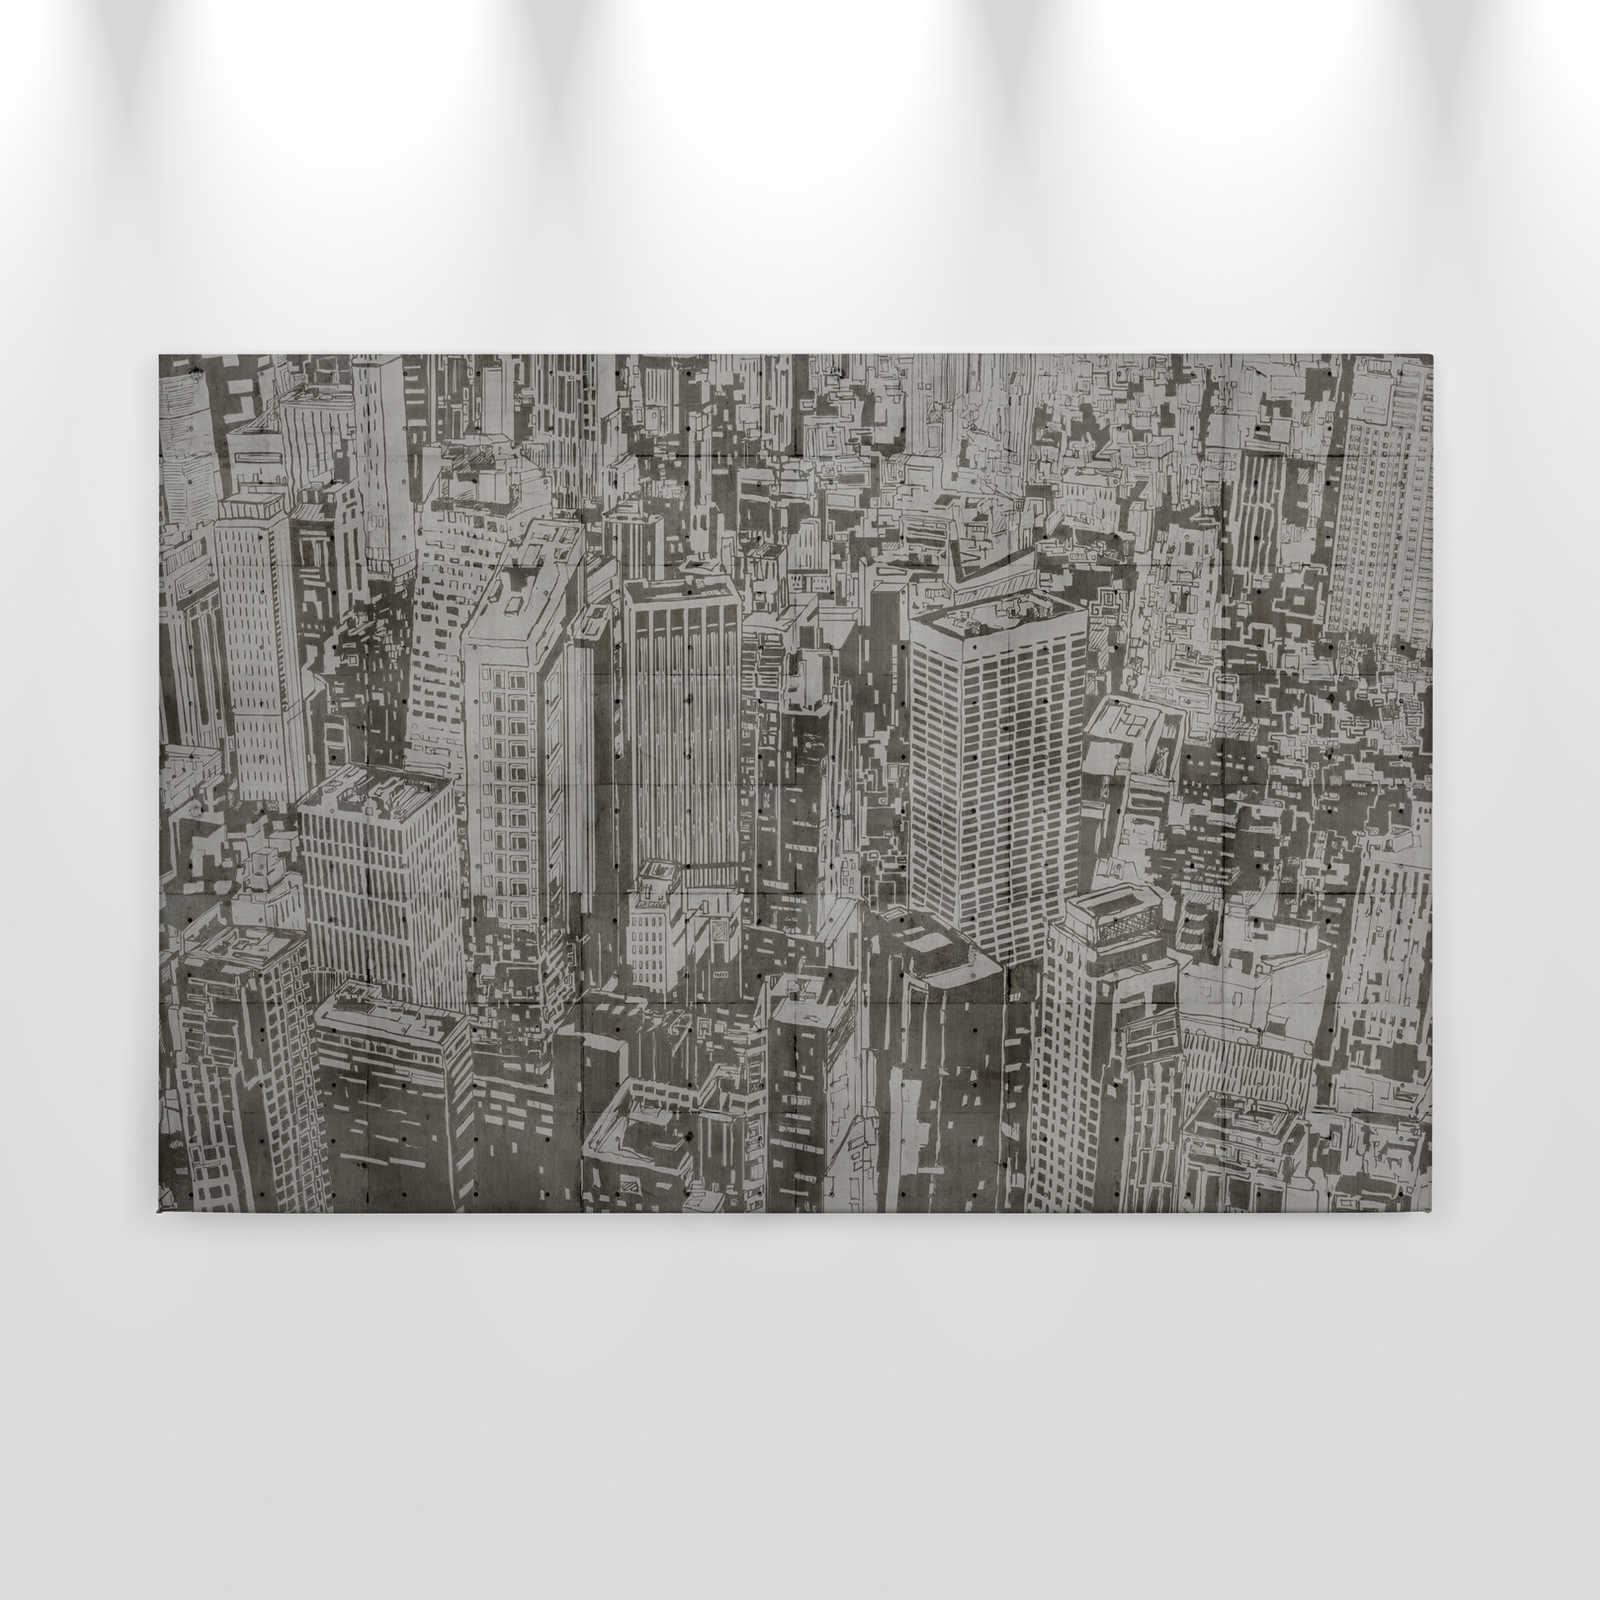             Downtown 2 - toile structure béton look New York - 0,90 m x 0,60 m
        